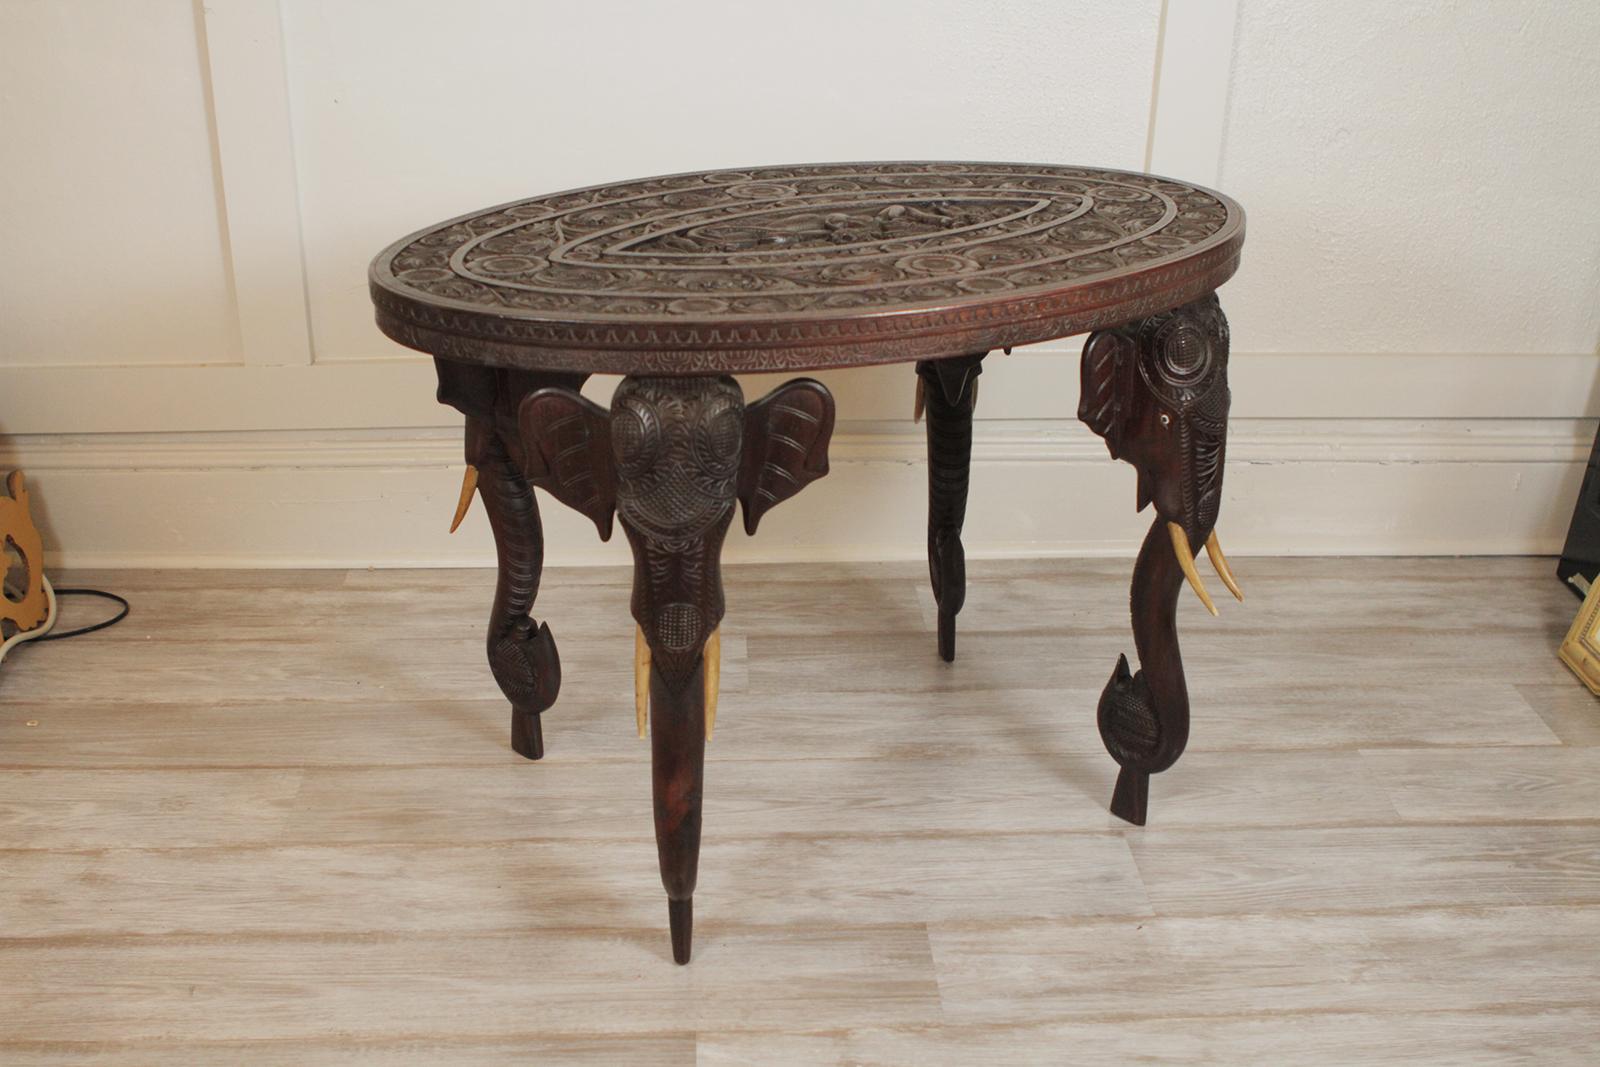 Exceptional quality hand-carved Anglo-Indian oval low table with elephant motif legs. The top with carved central figure with bands of carving encircling the center. The legs are carved elephant heads with upturned trunks, circa 1900.